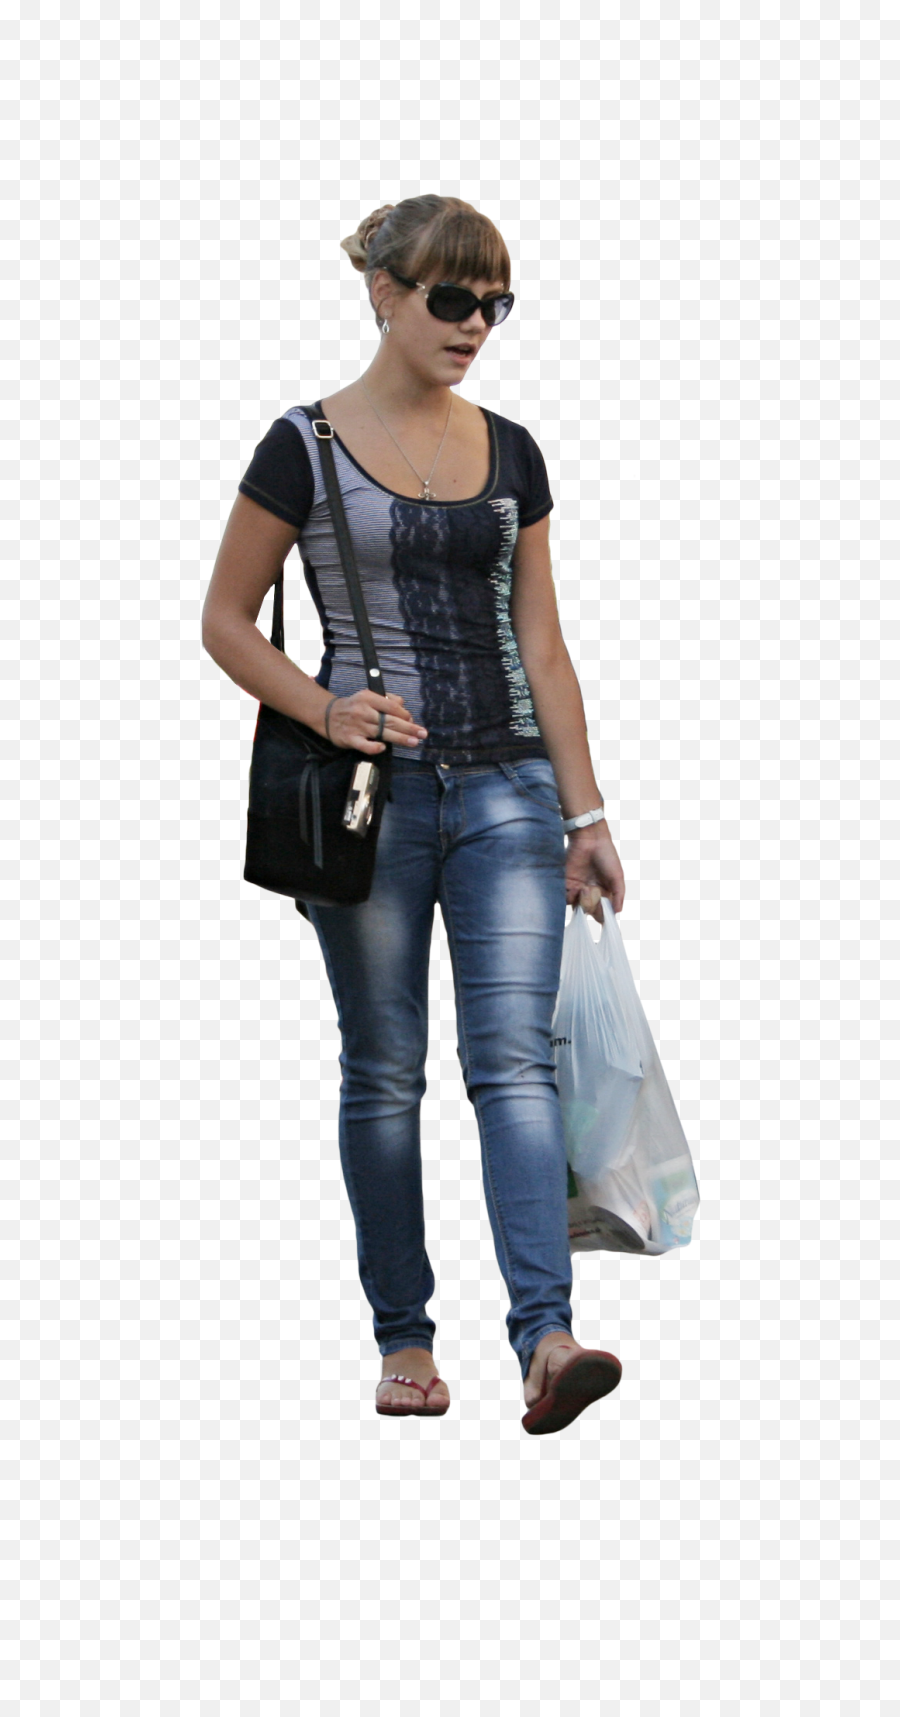 Cut Out People - People Cut Out Shopping Full Size Png Shopping Cut Out,Shopping Png